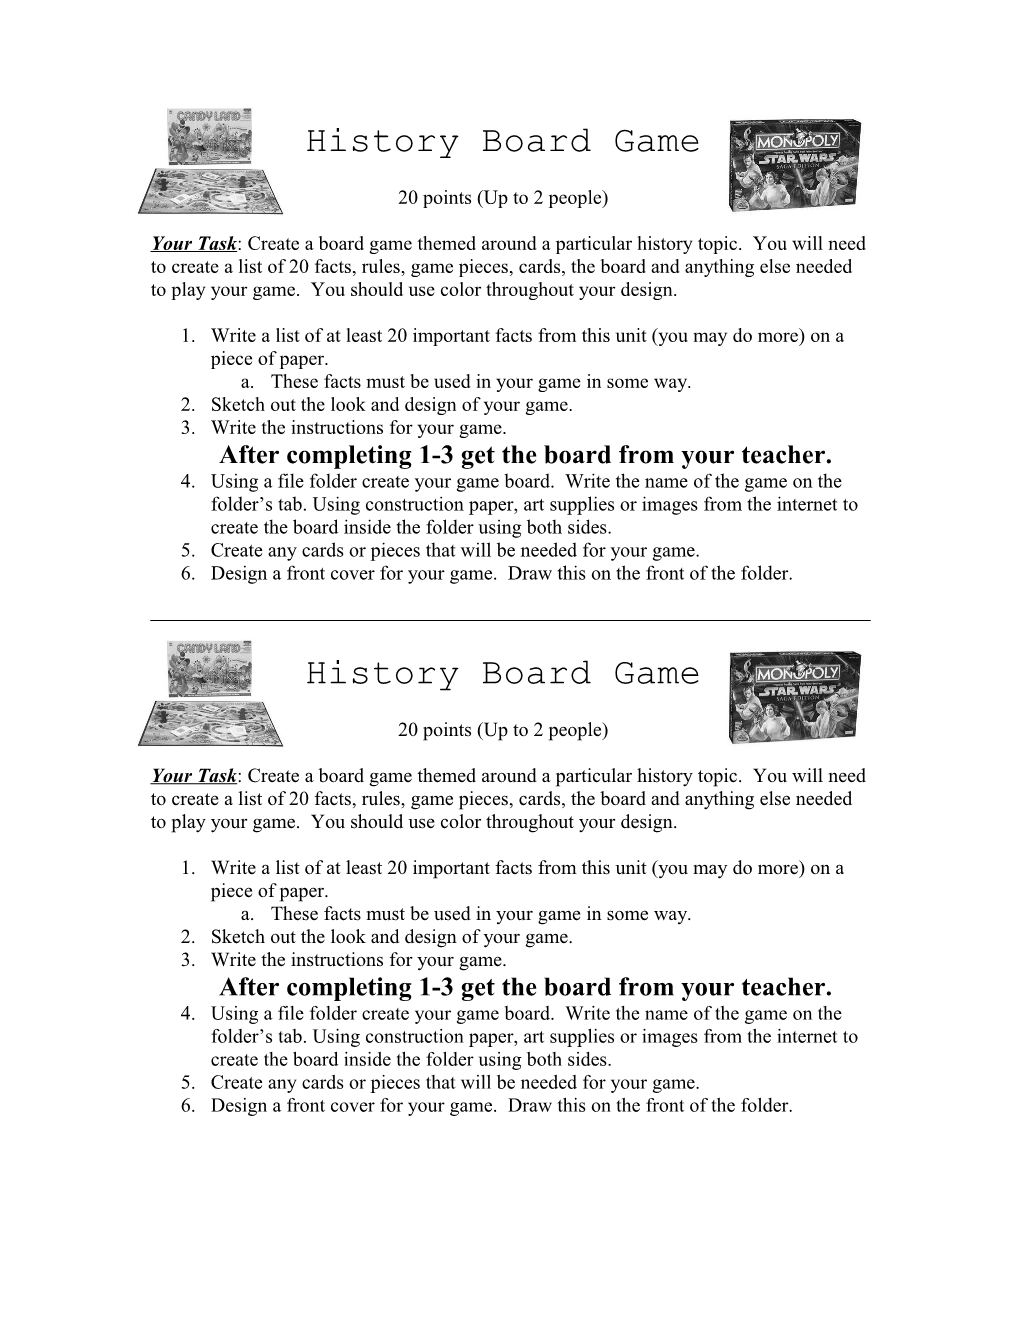 History Board Game